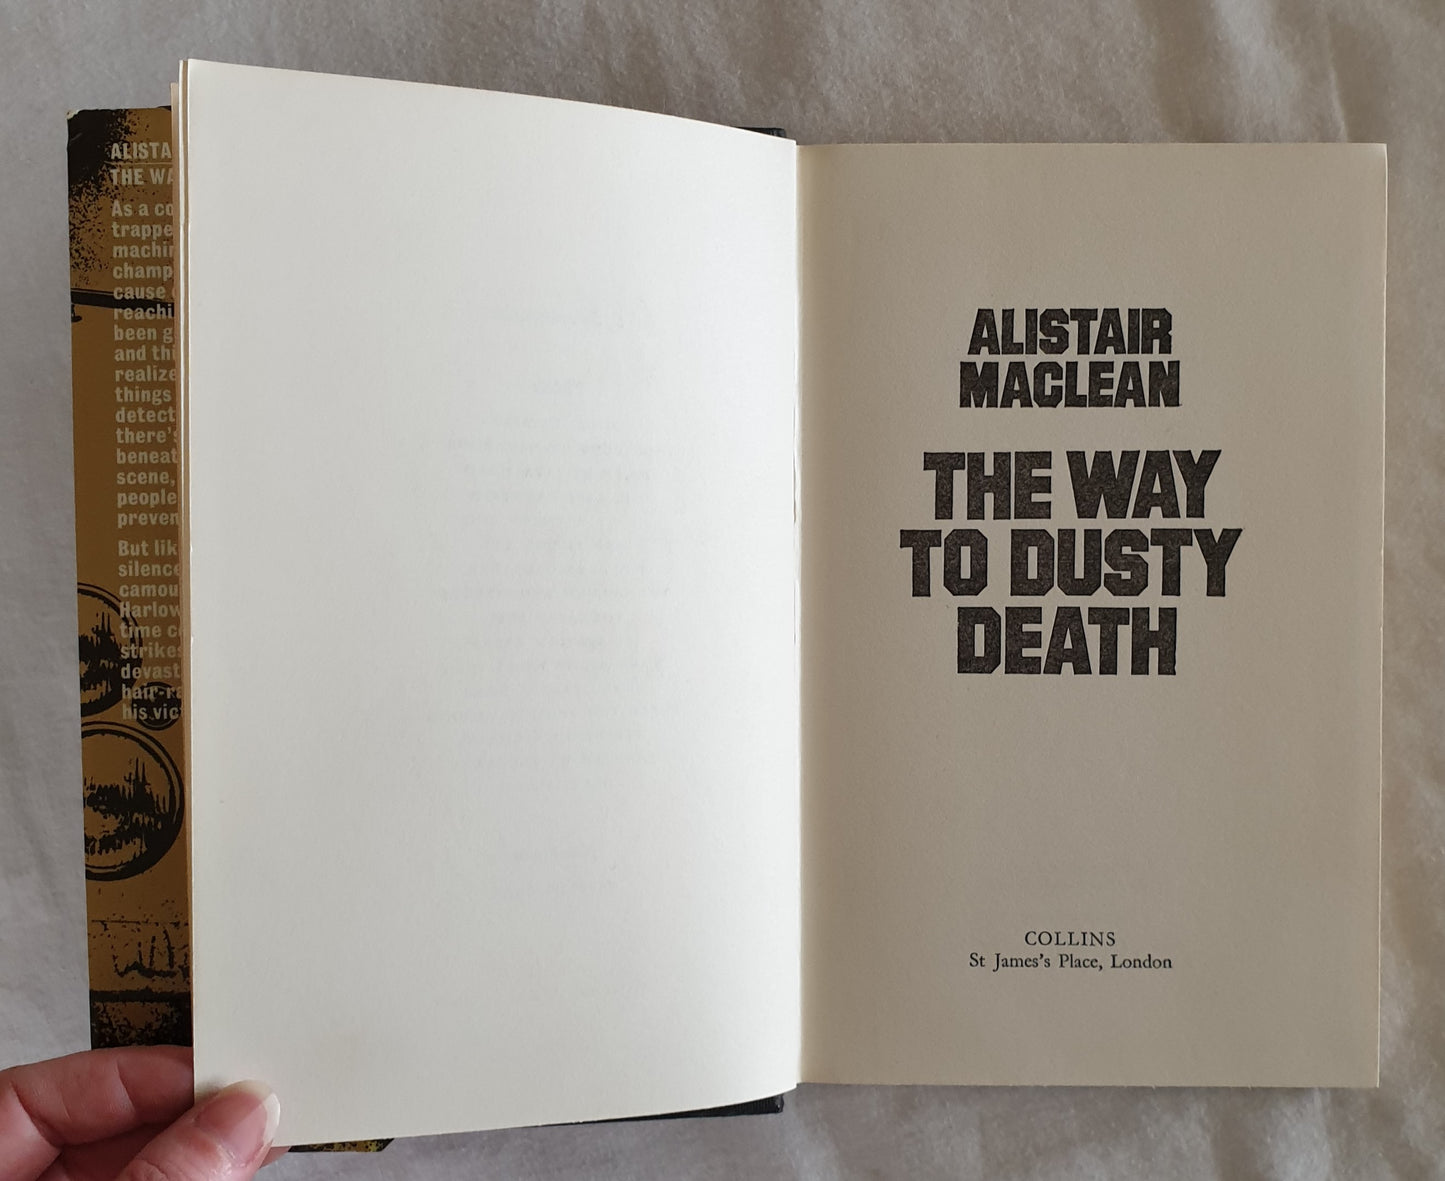 The Way To Dusty Death by Alistair Maclean